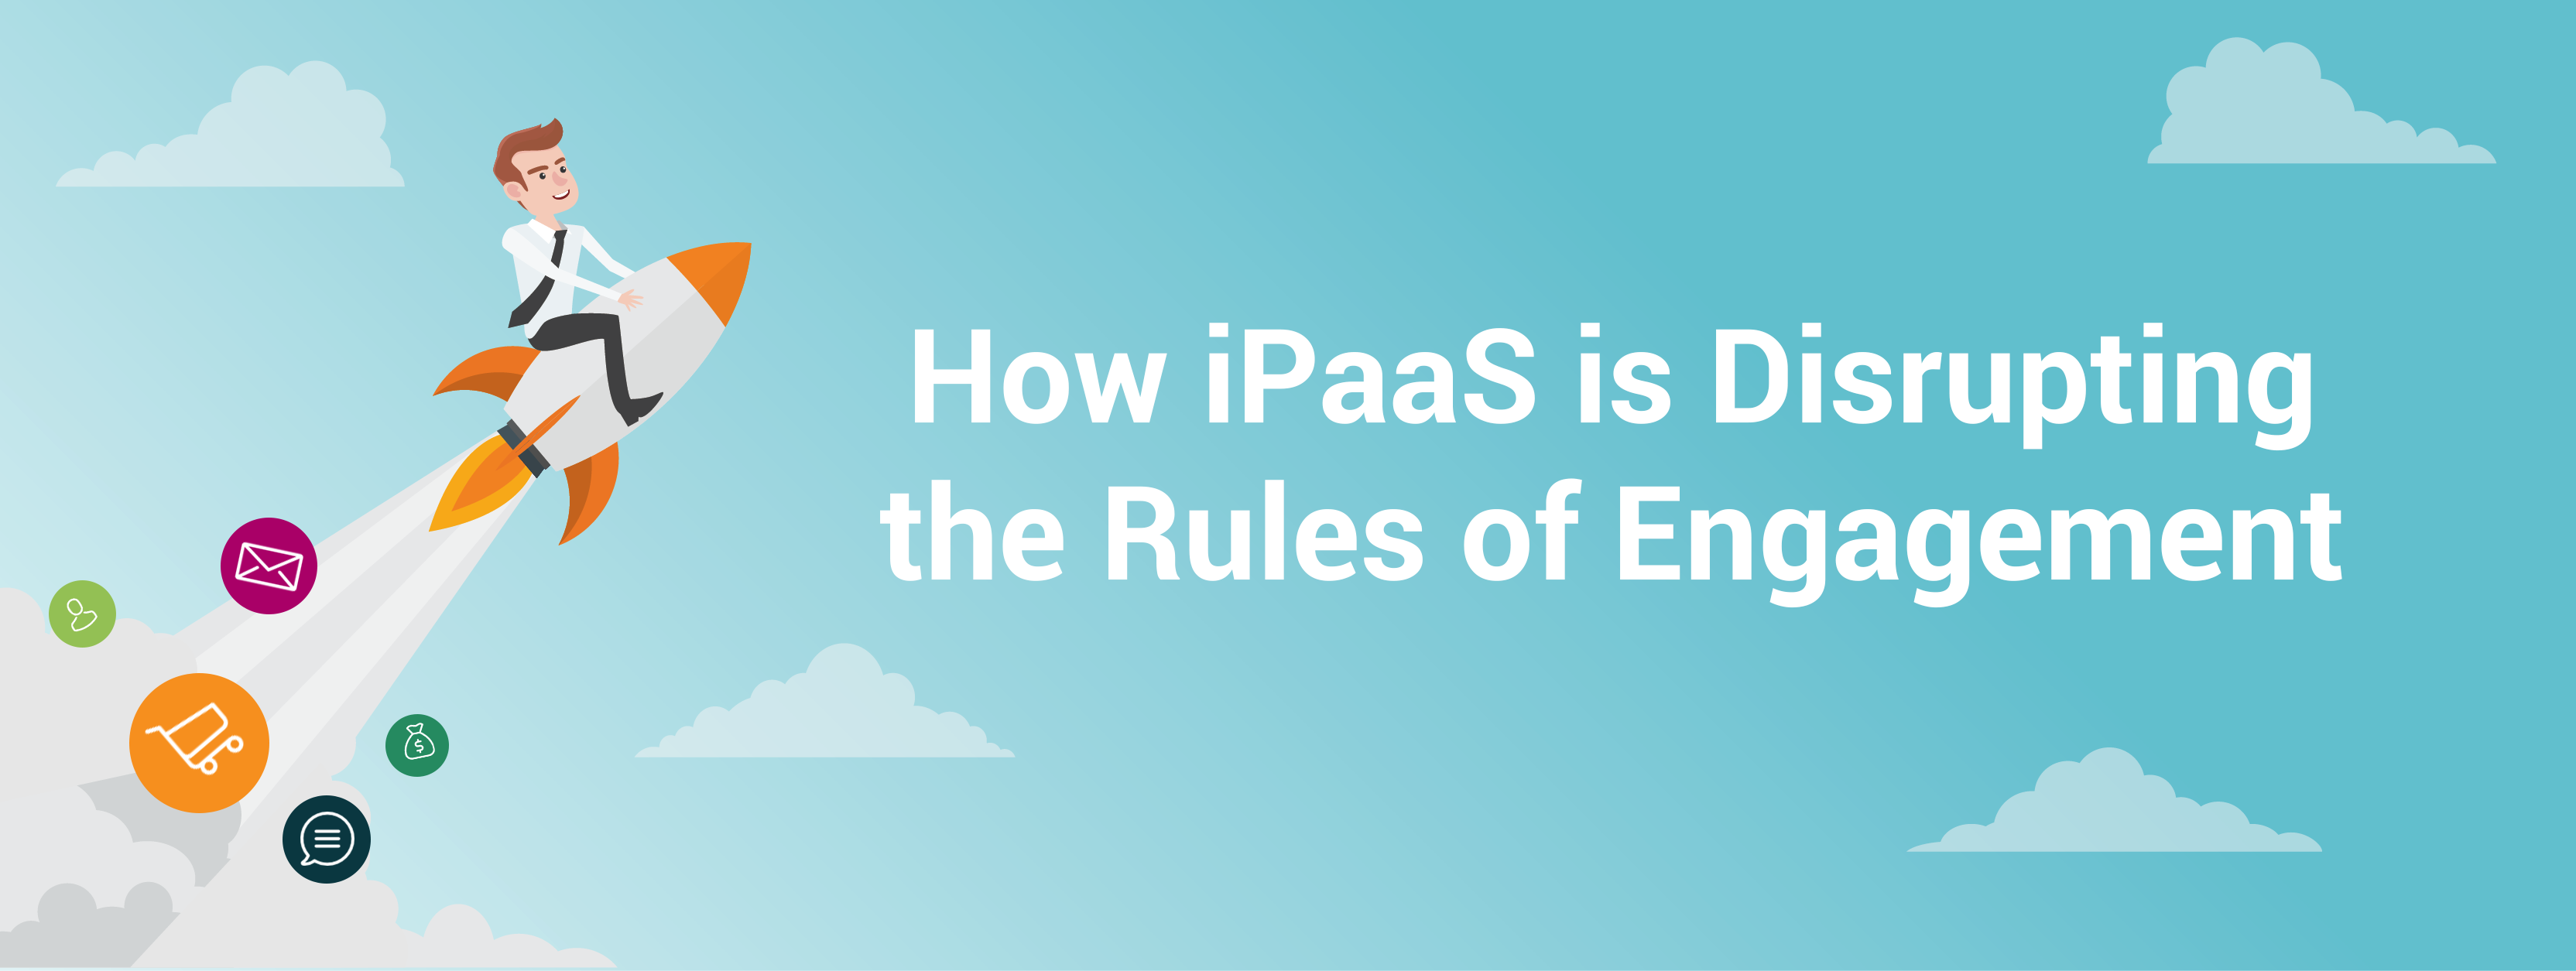 How iPaaS is Disrupting the Rules of Engagement